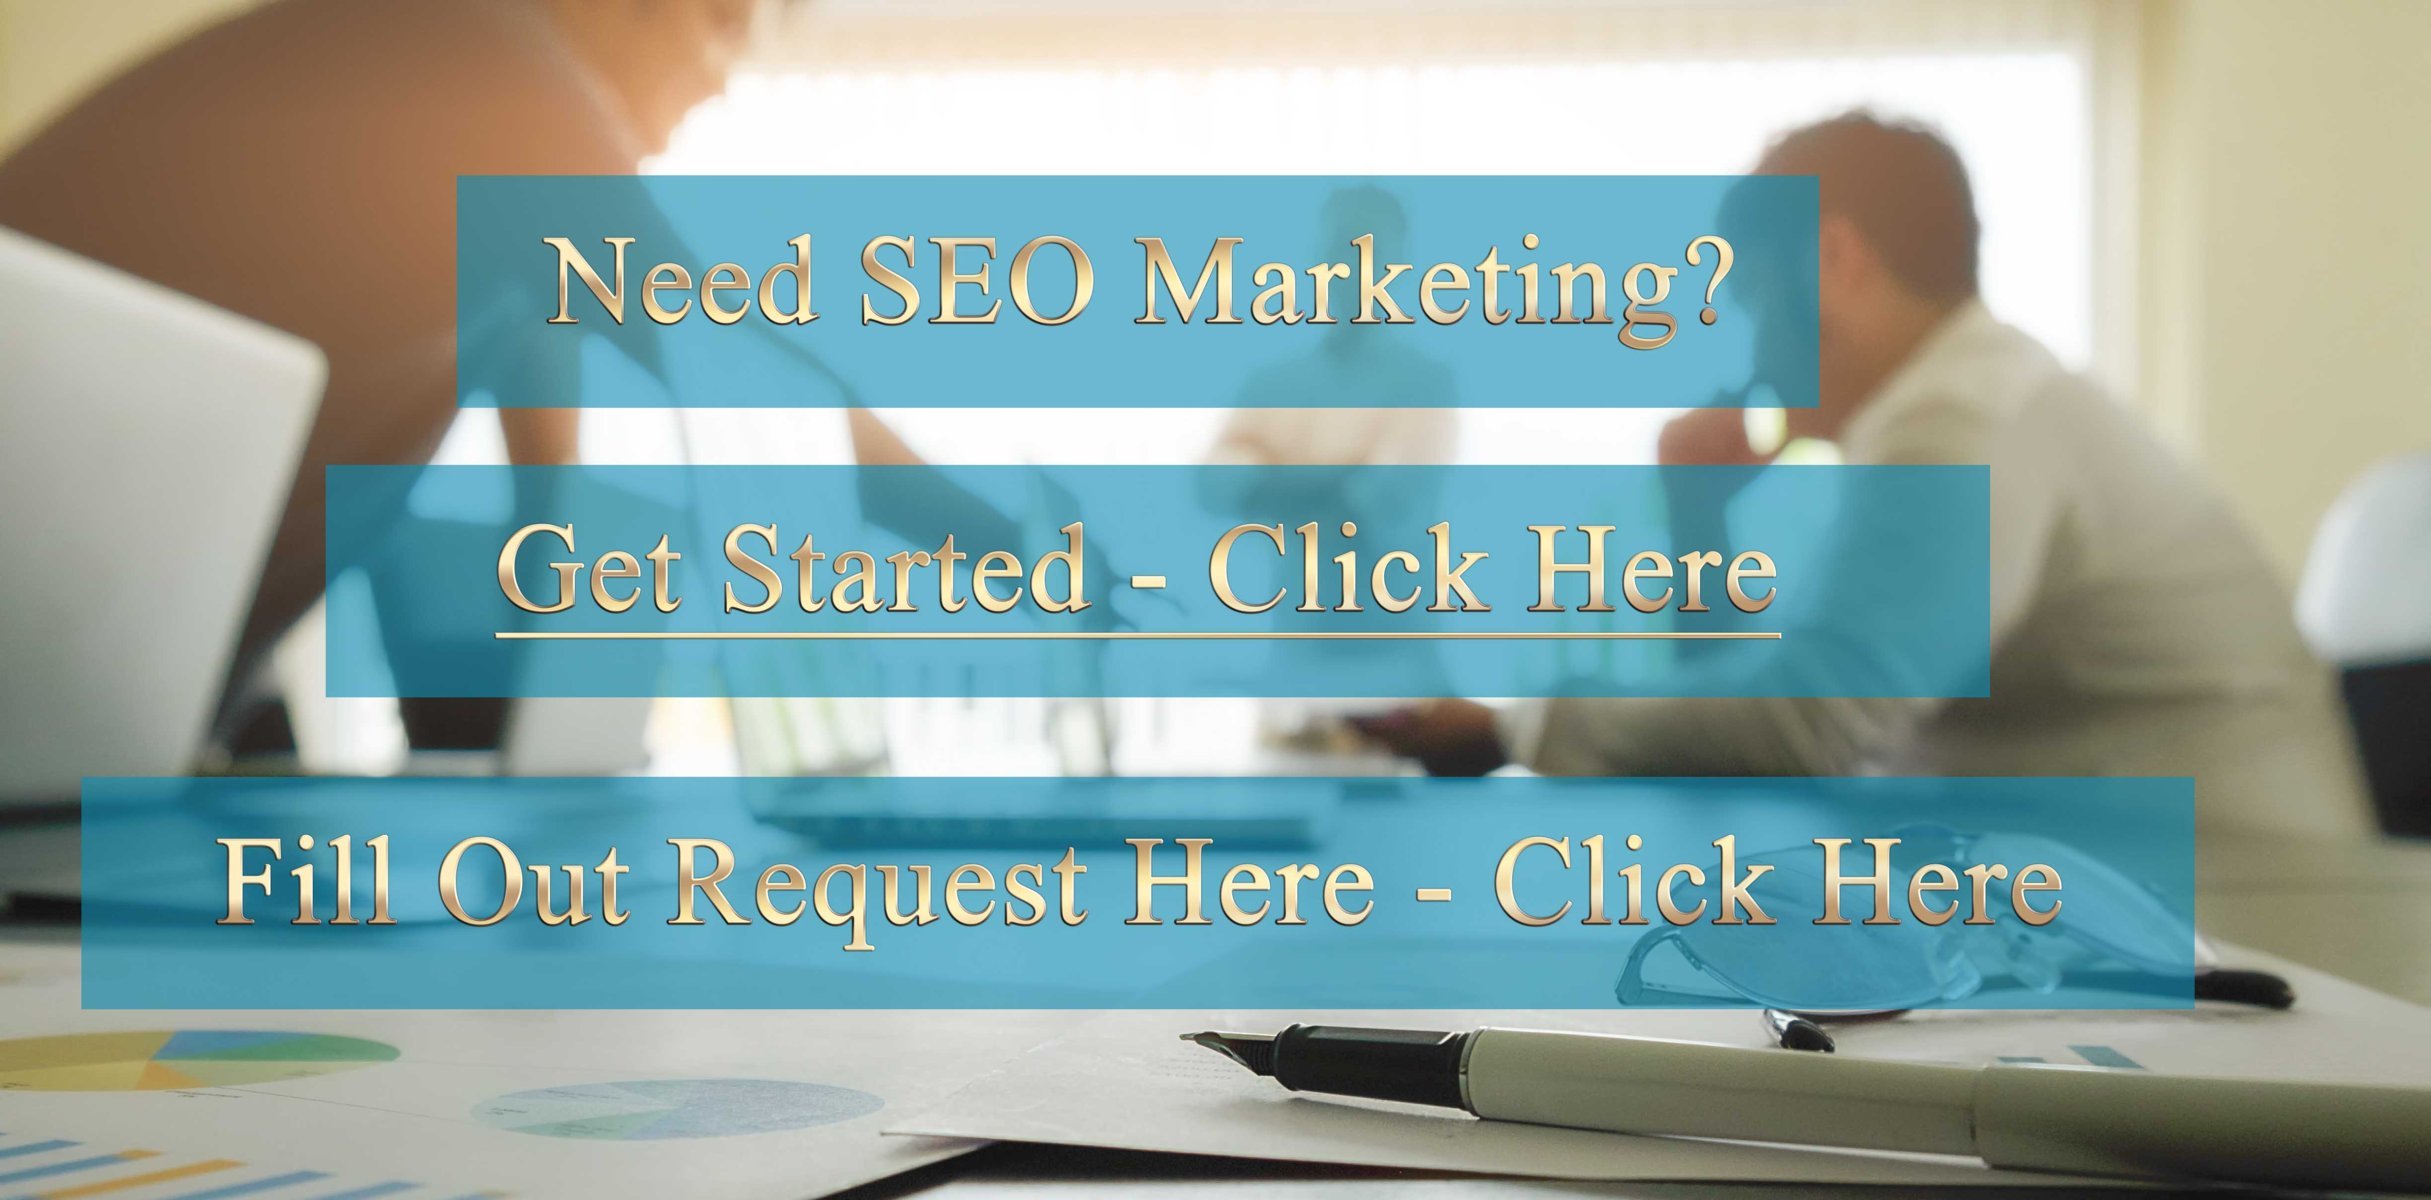 Need SEO Marketing? Click Here to Get Started on SEO Marketing